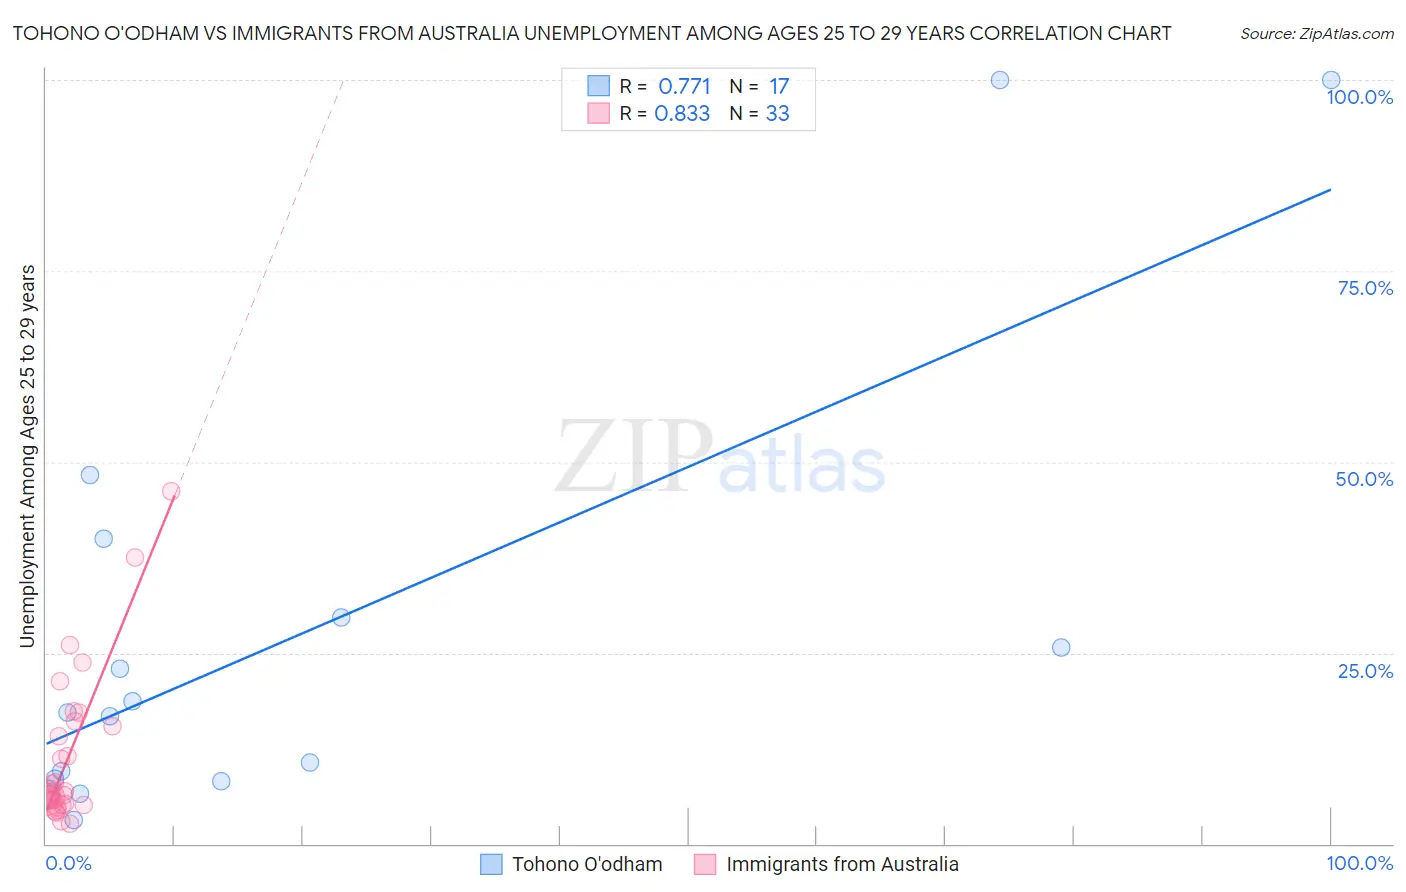 Tohono O'odham vs Immigrants from Australia Unemployment Among Ages 25 to 29 years